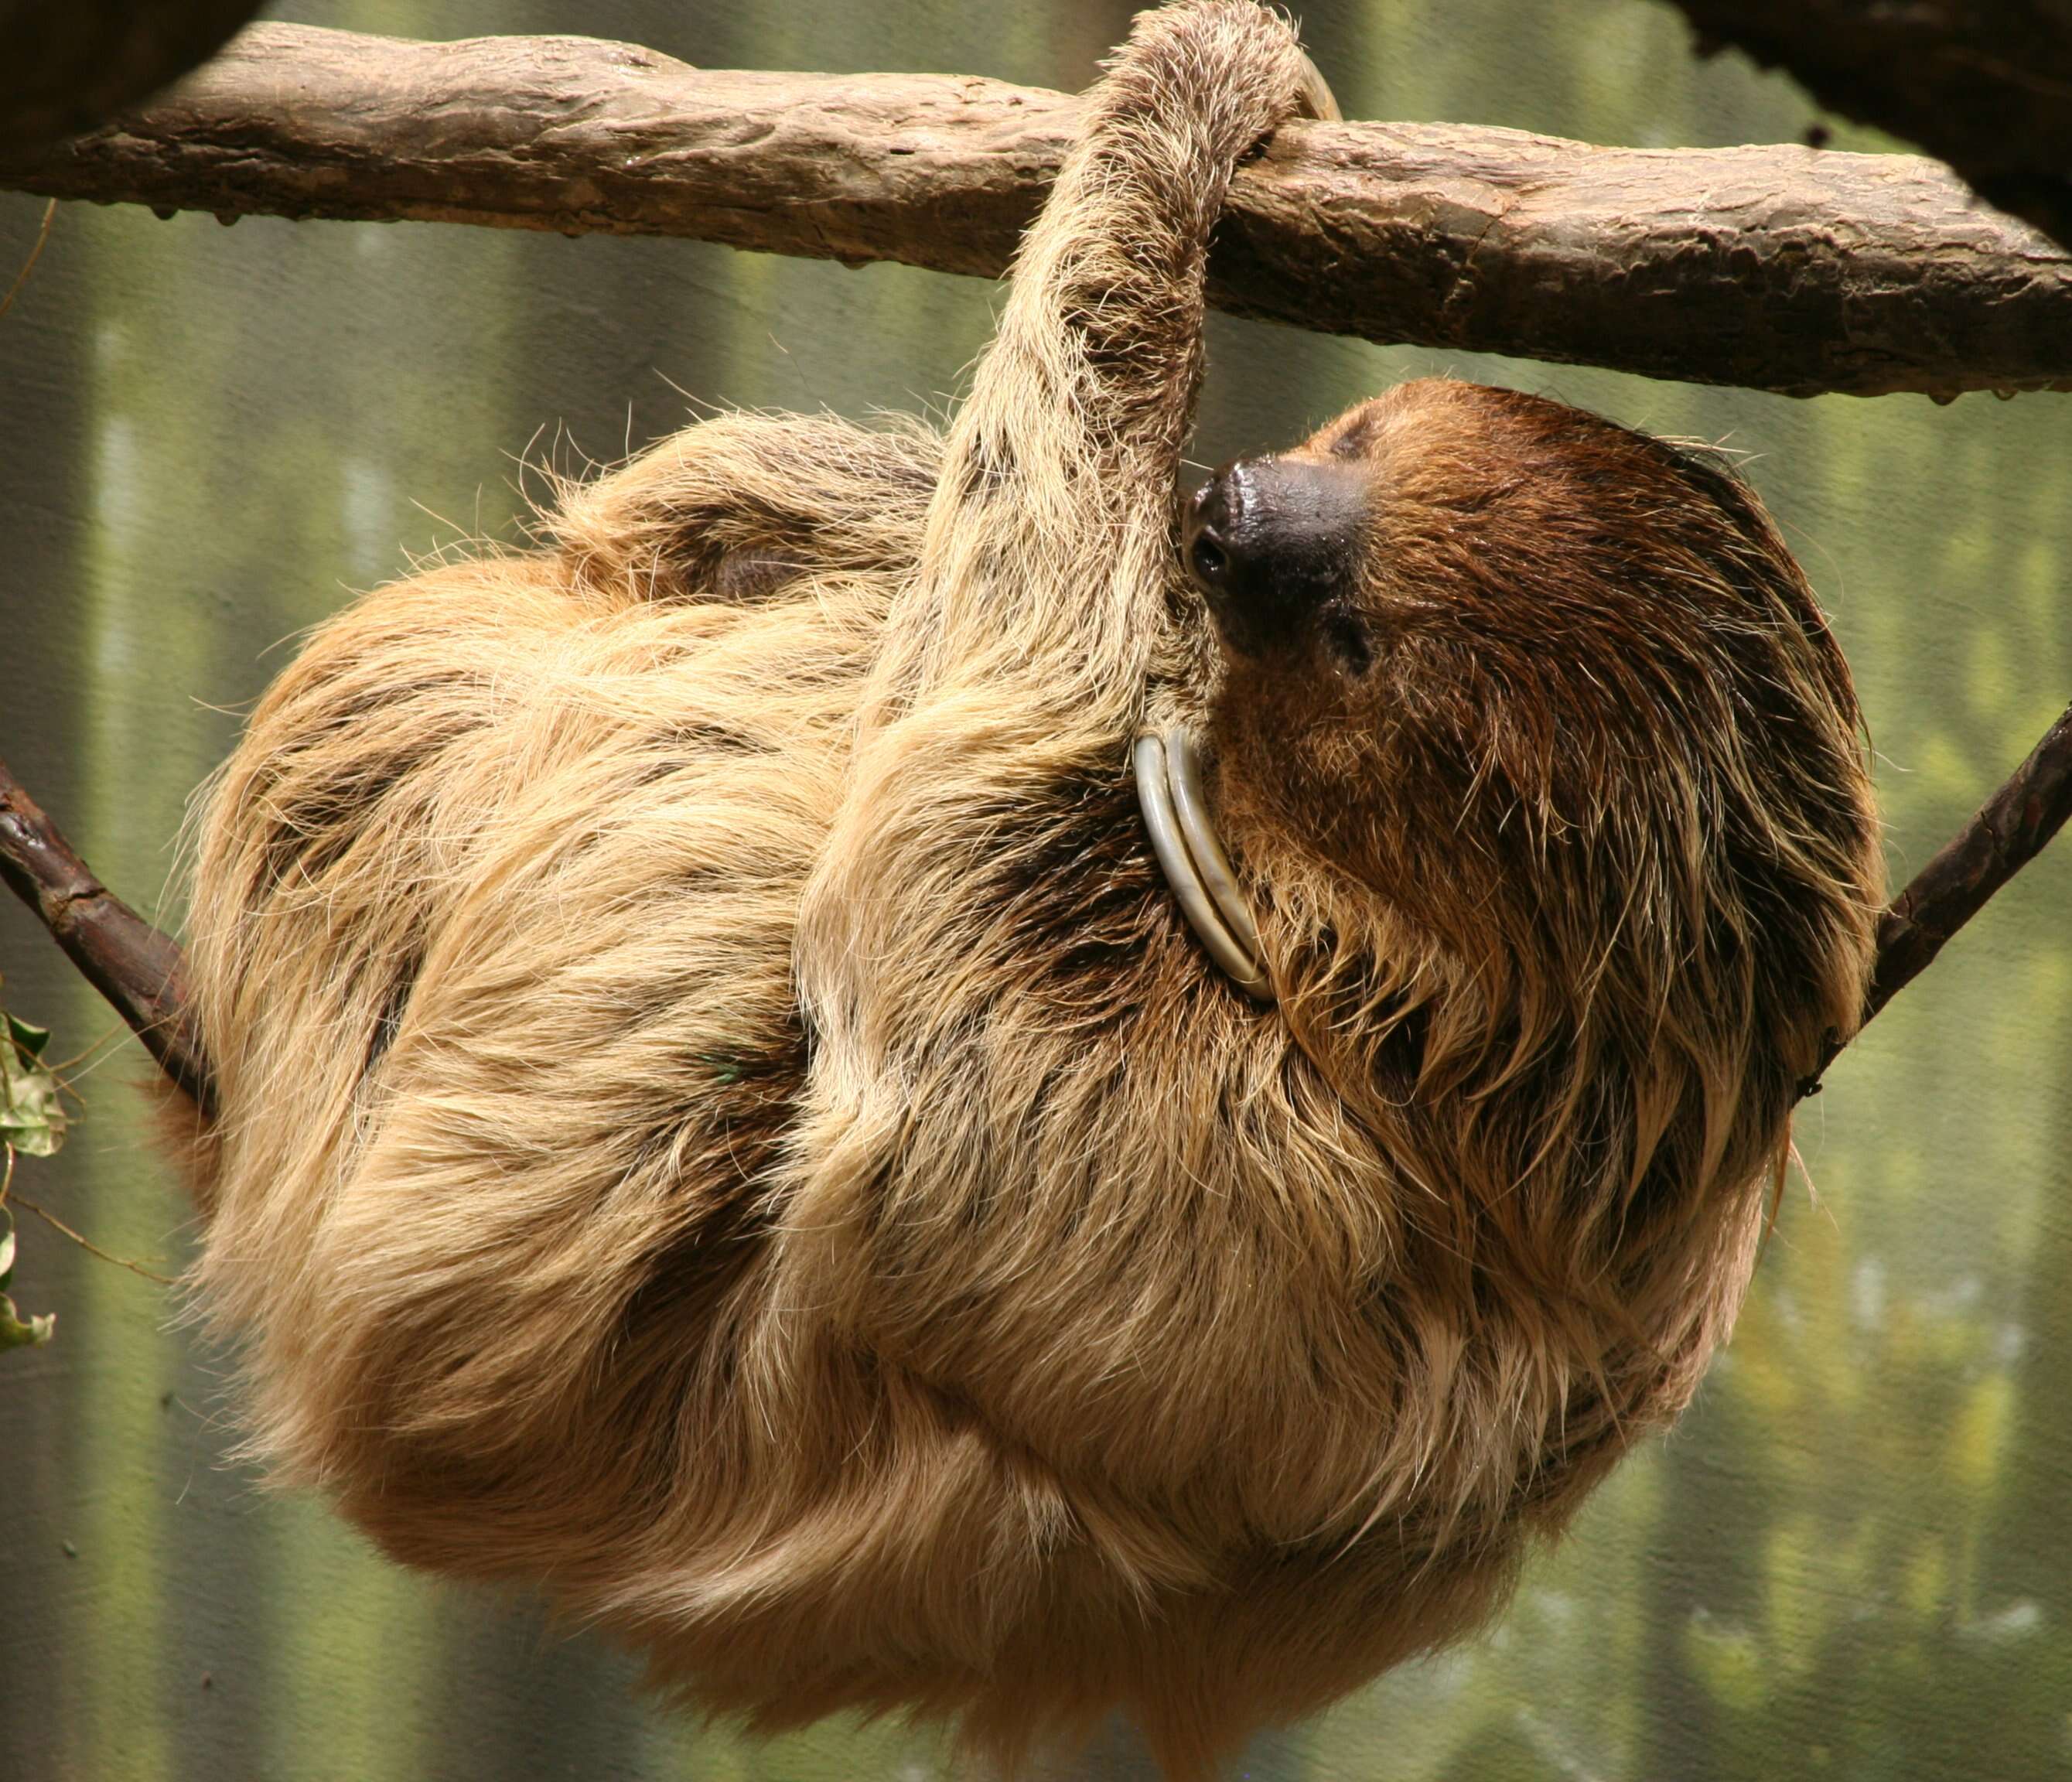 Image of megalonychid sloths